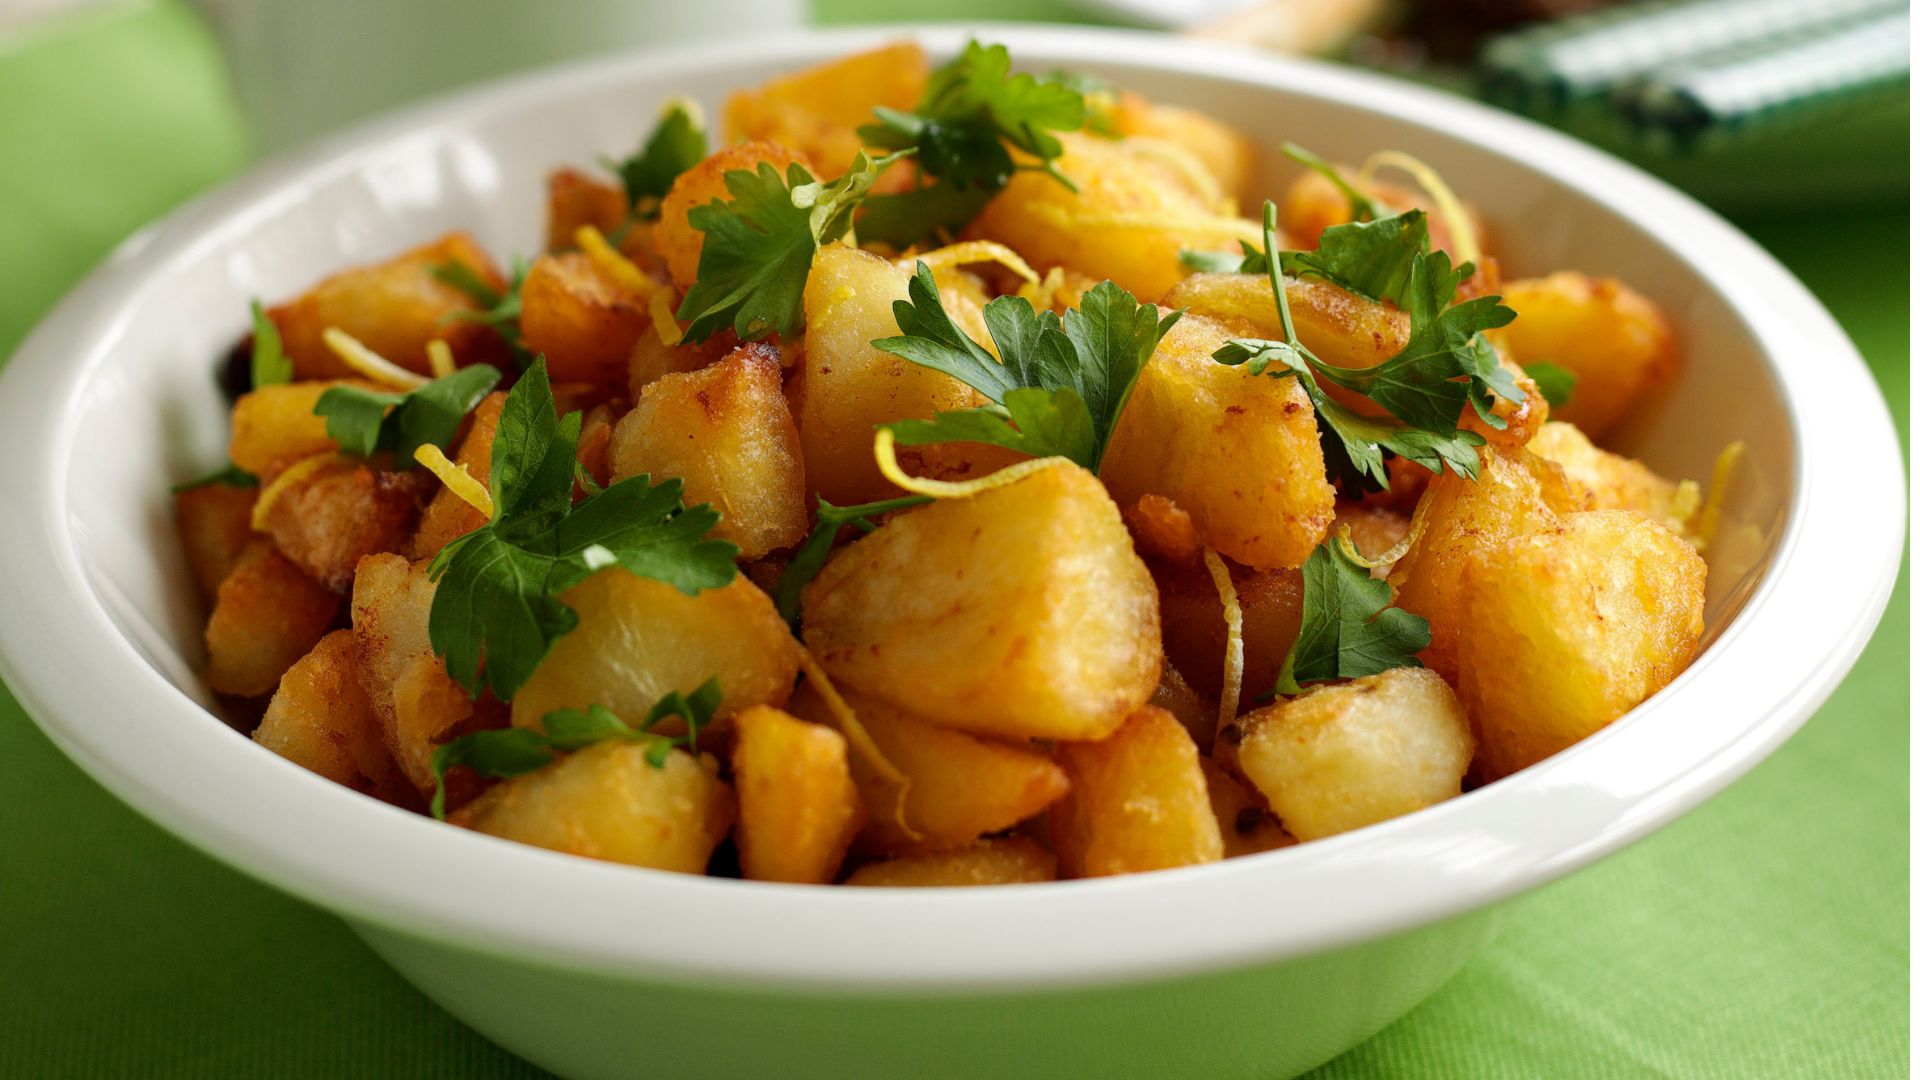 Crispy roast potatoes in a bowl with a sprig of parsley